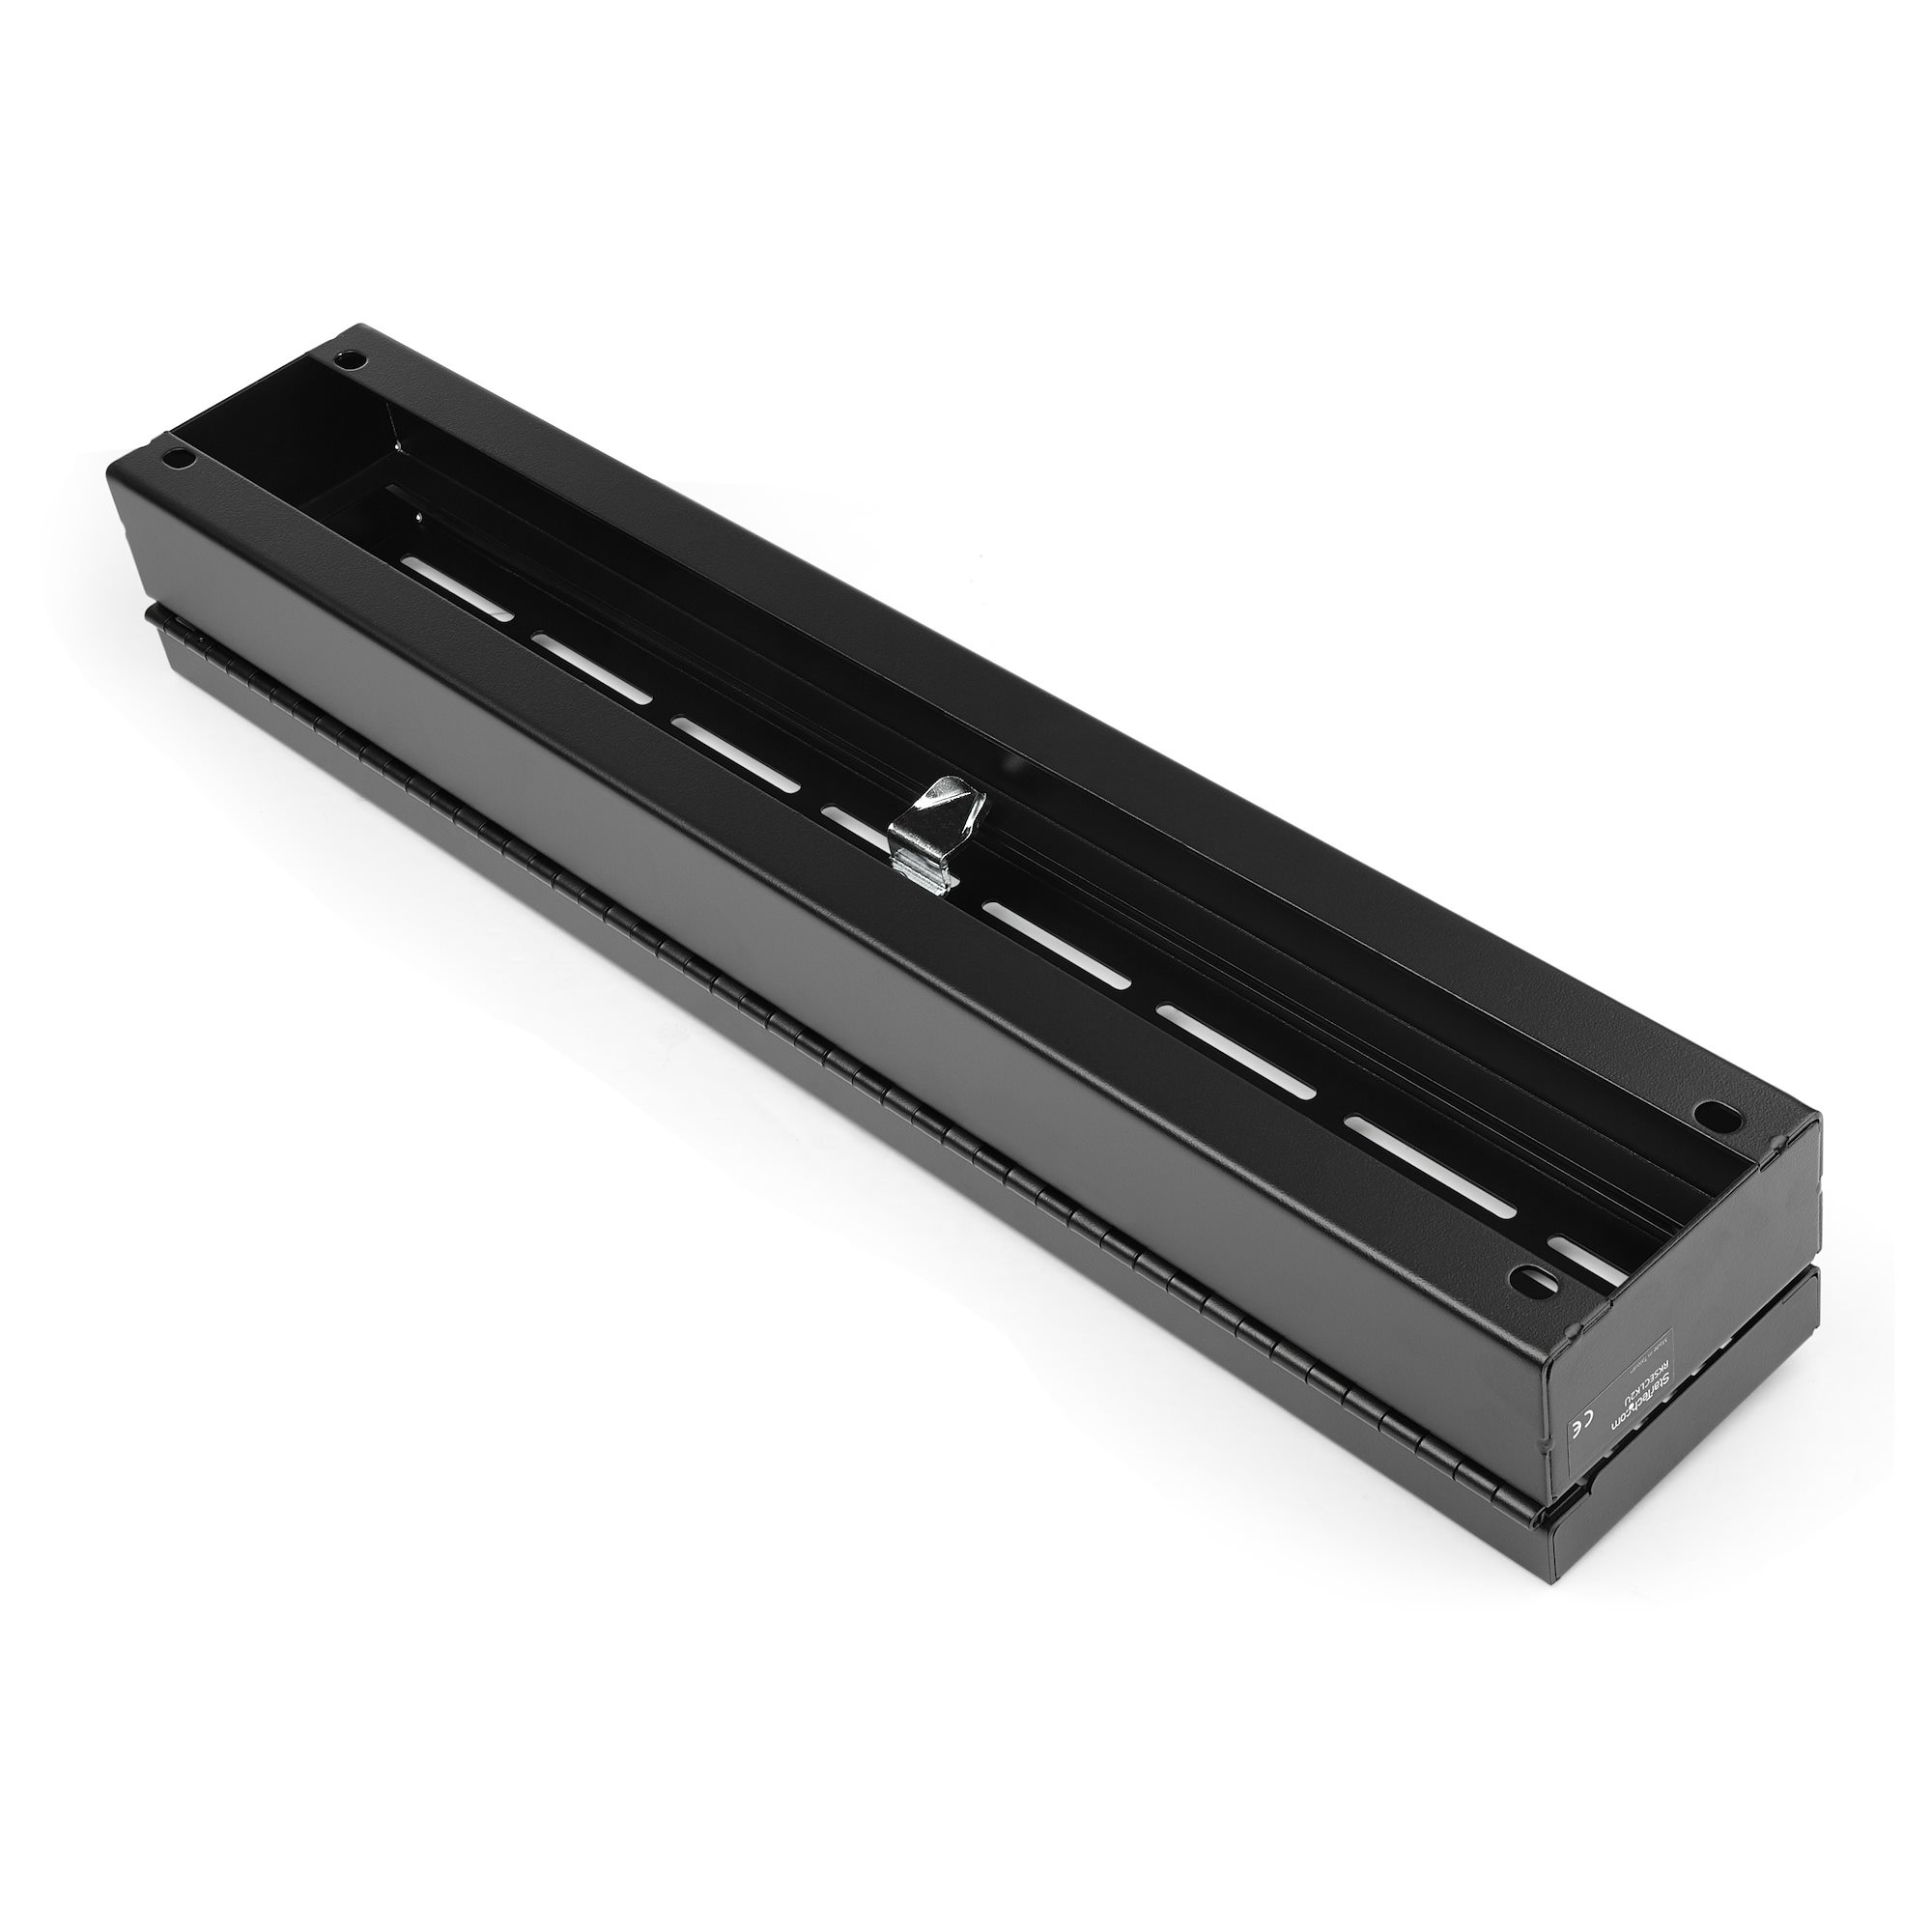 StarTech.com 5U Rack-Mount Security Cover Locking with Key Compatible with 19 inch Racks RKSECLK5U Hinged 